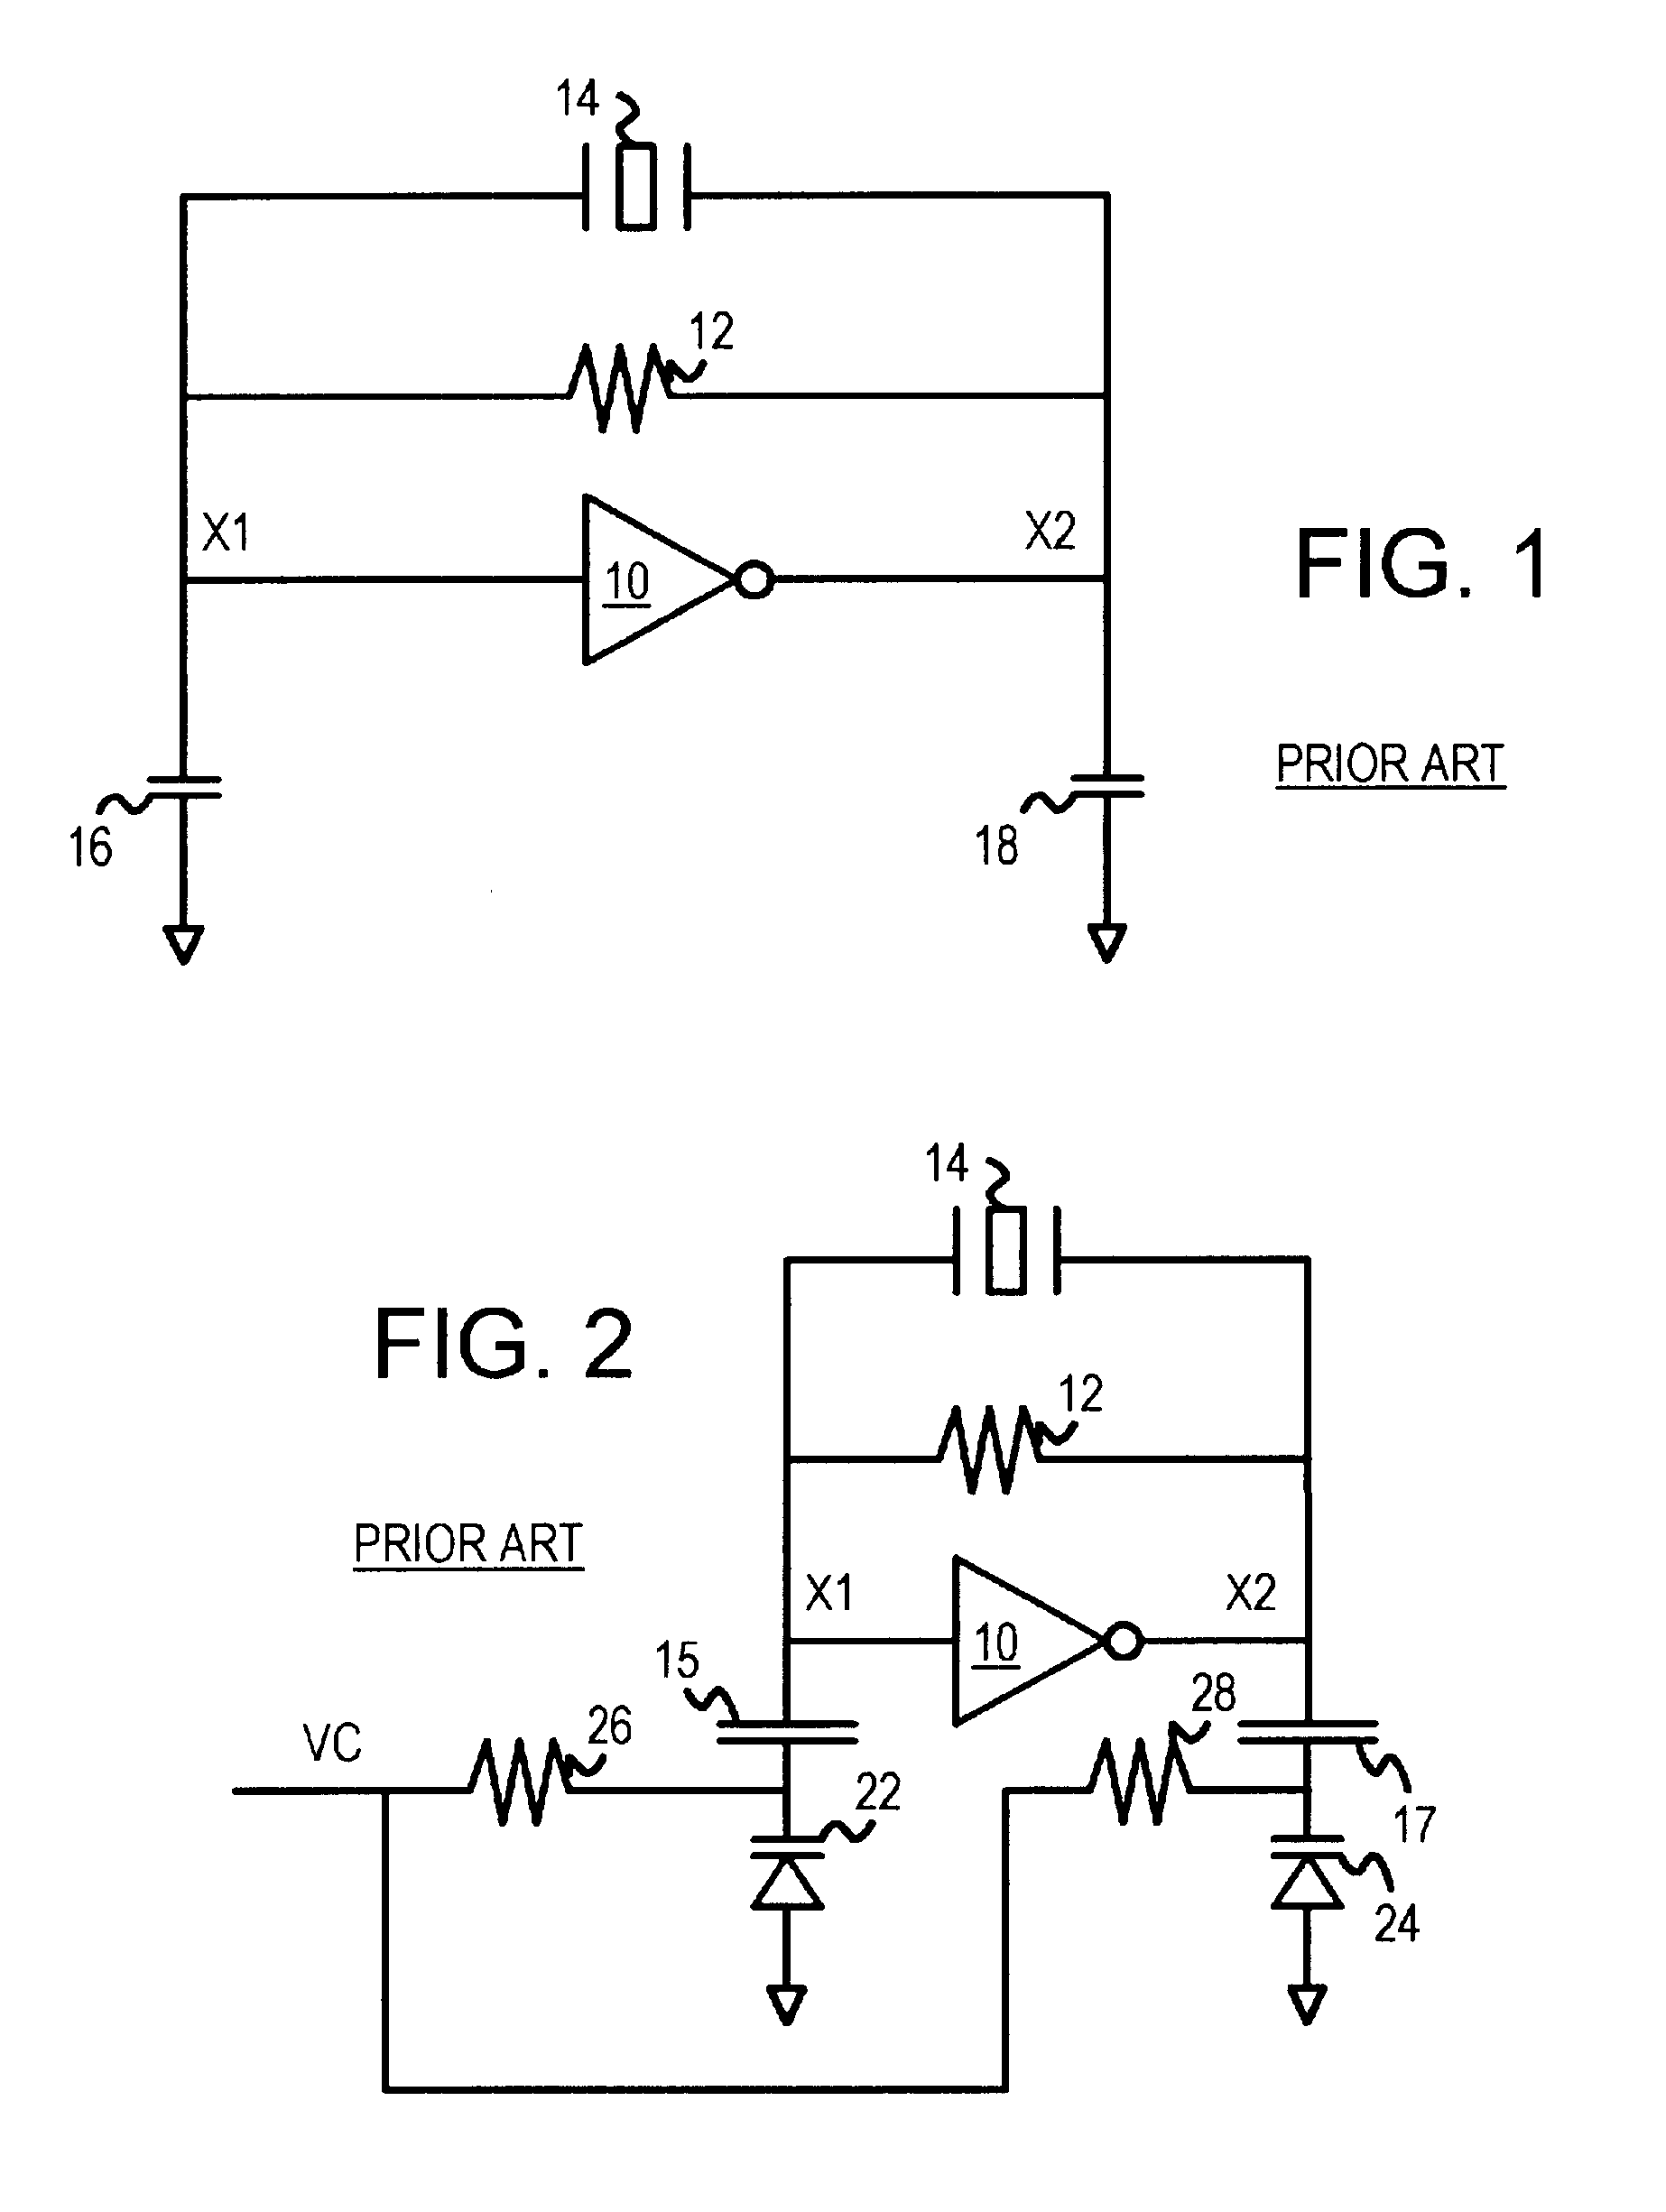 Voltage-controlled crystal oscillator (VCXO) using MOS varactors coupled to an adjustable frequency-tuning voltage